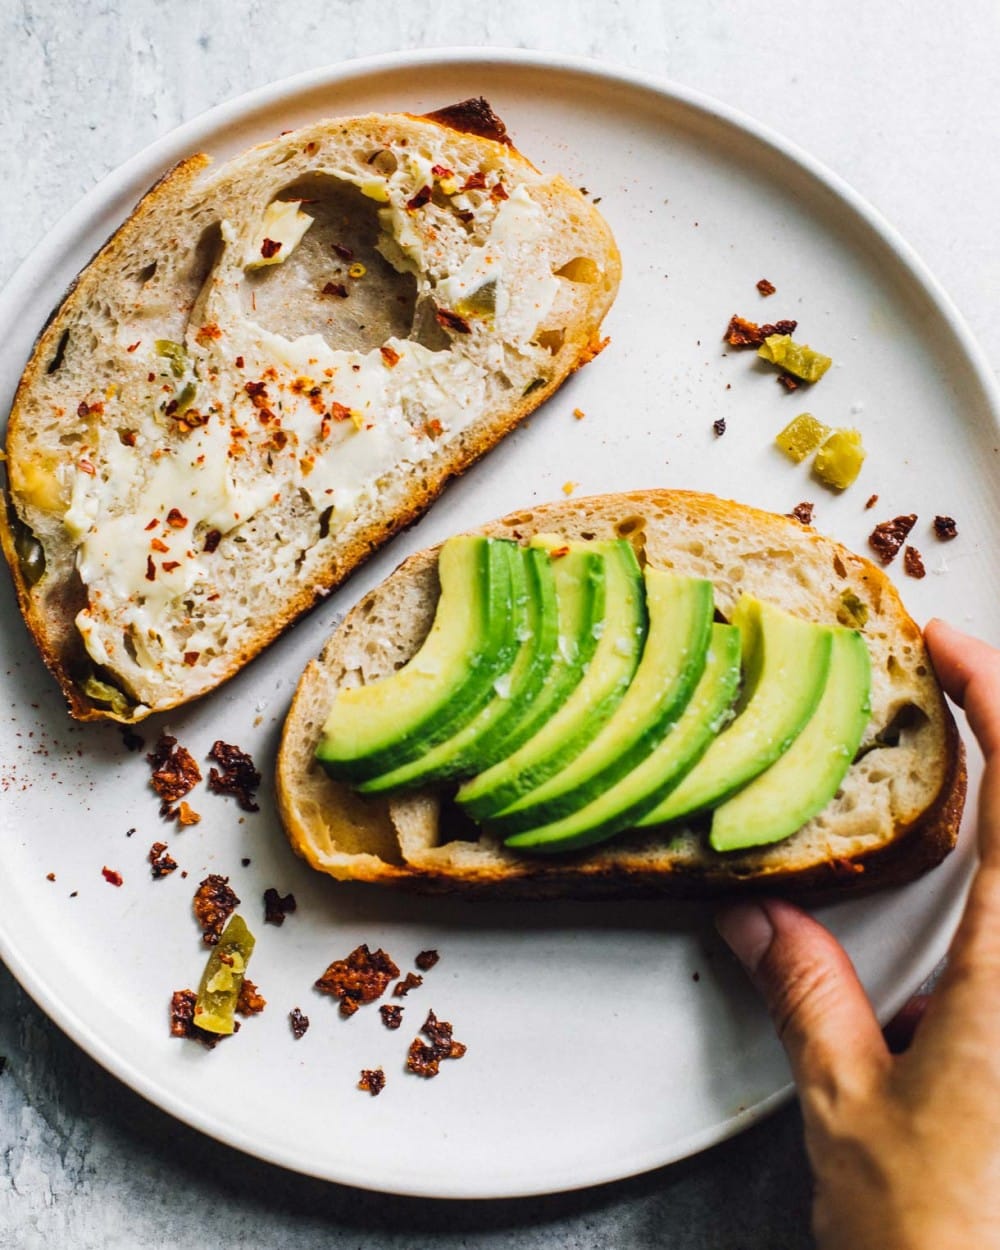 two slices of sourdough bread on a white plate, one with avocado, the other with butter and red pepper flakes.